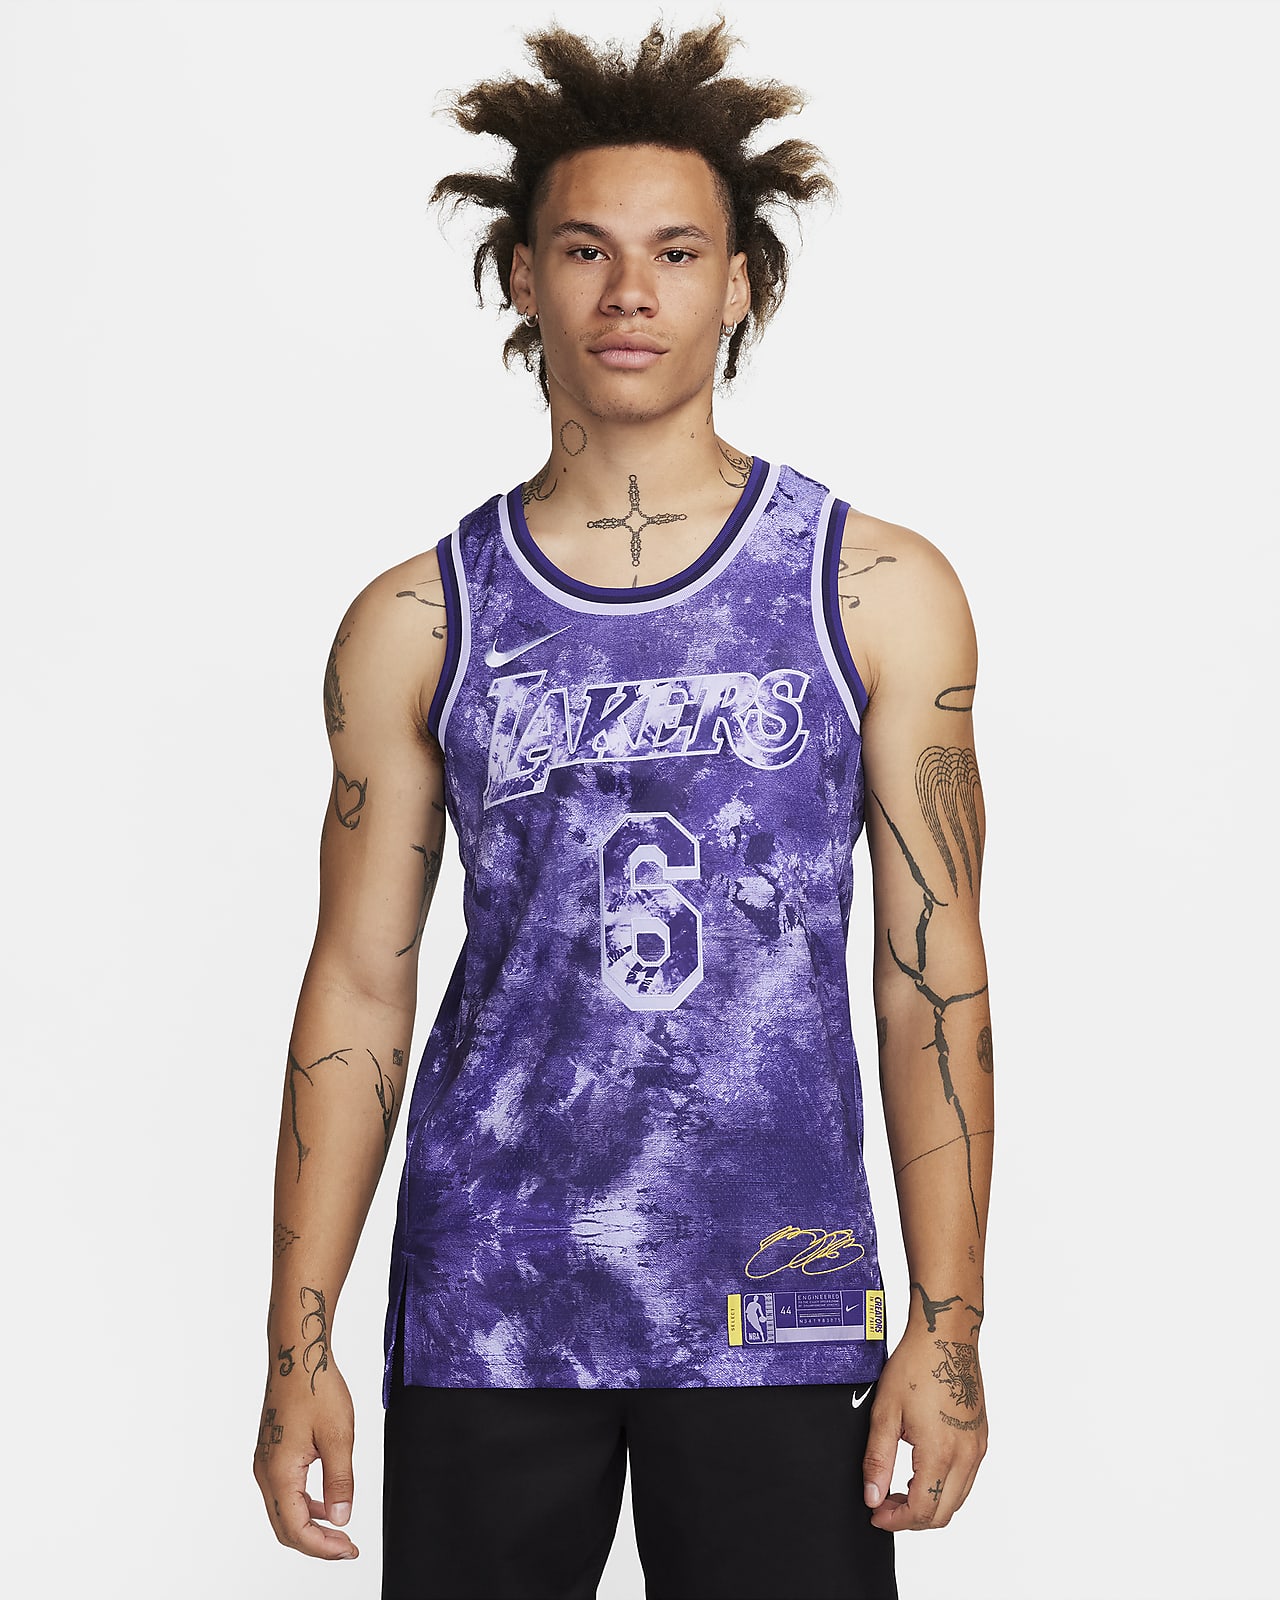 lakers jersey james 23